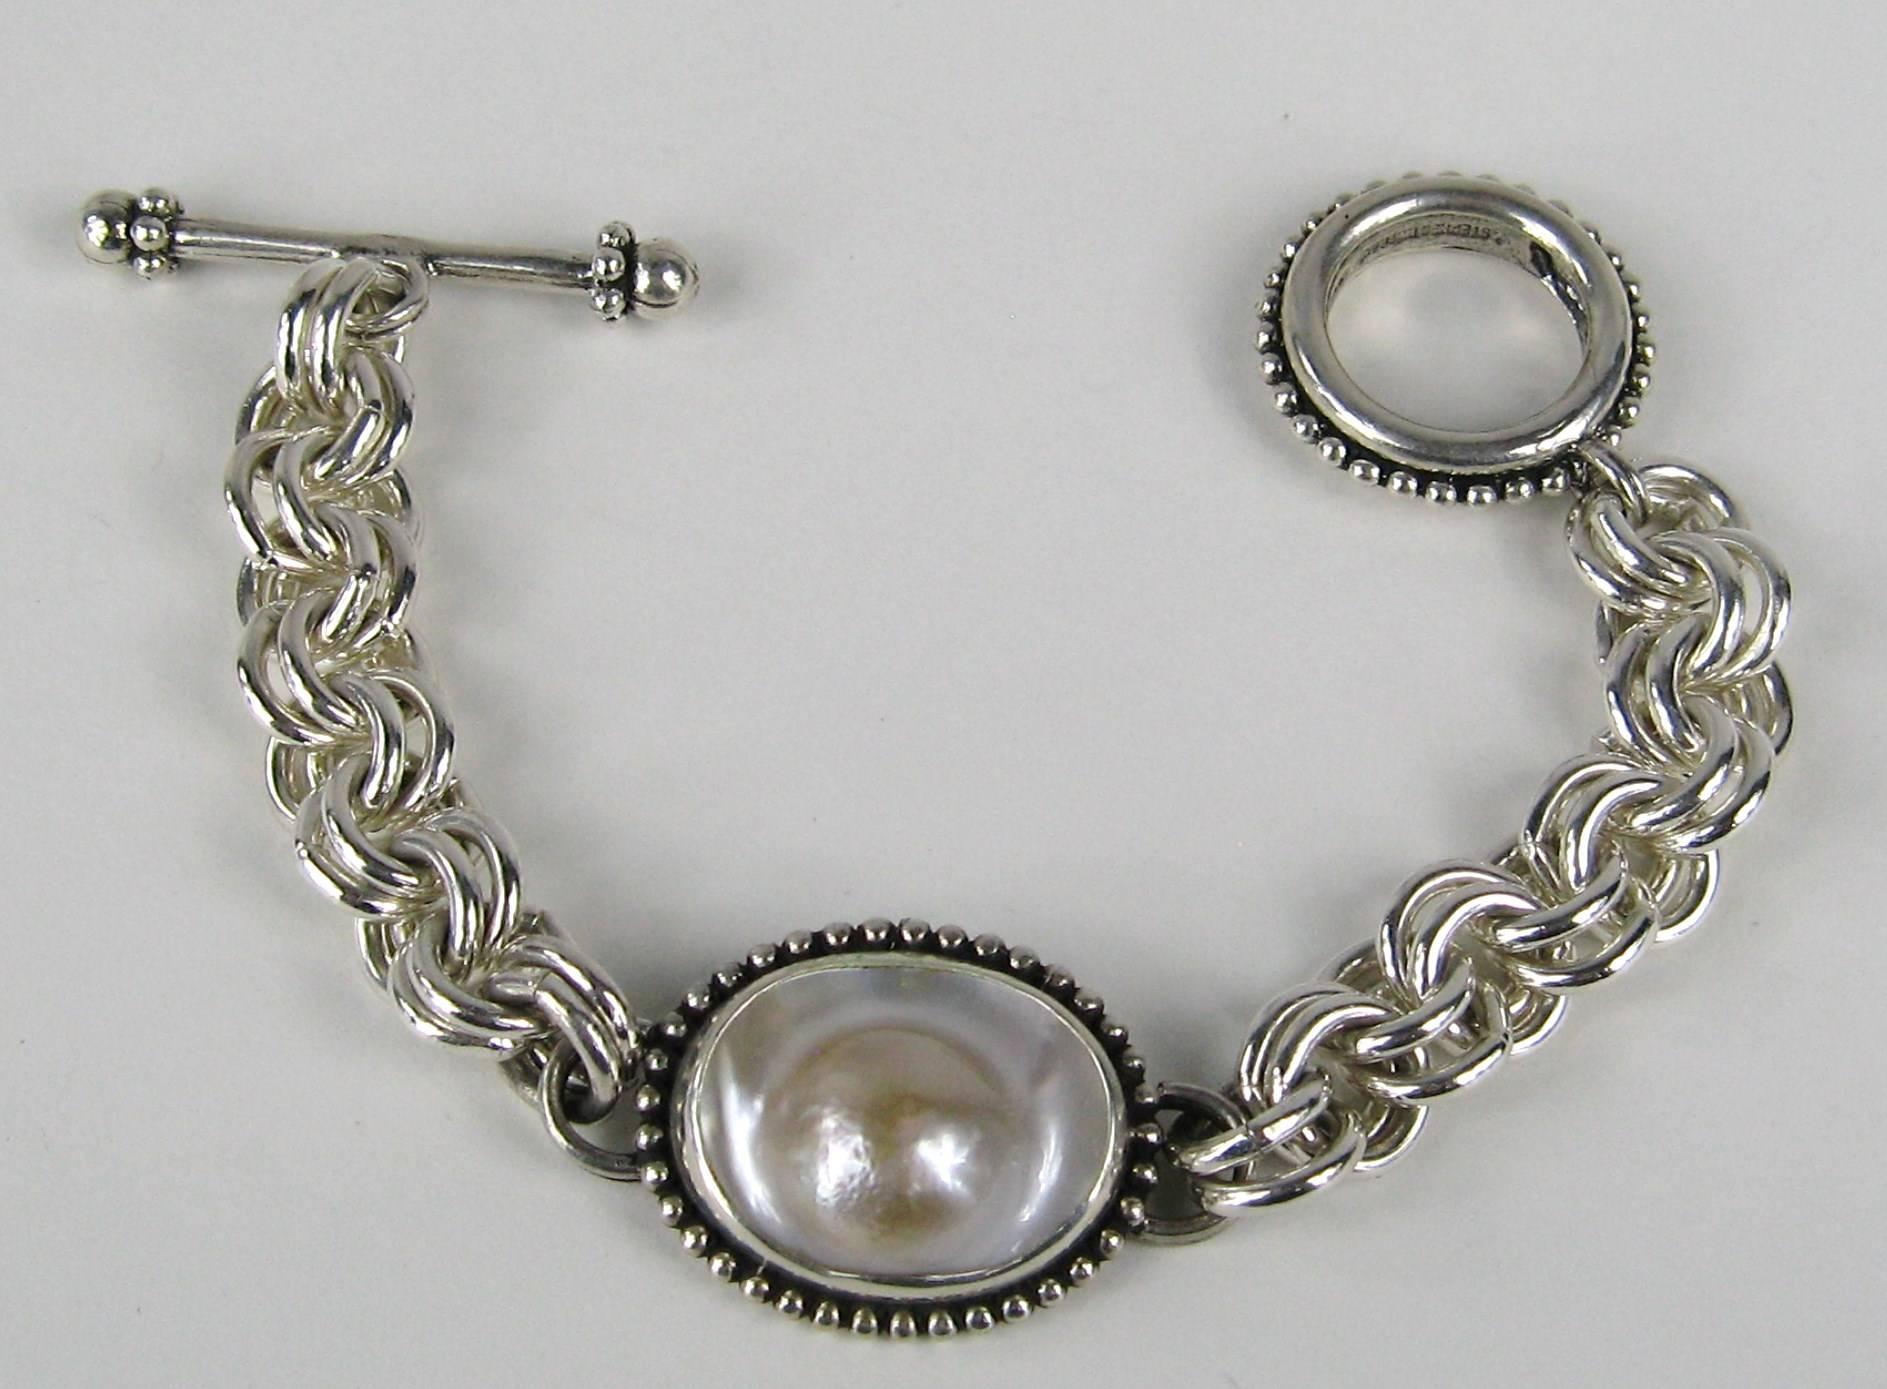 Stephen Dweck Sterling Silver New old stock, tags still attached. Purchased from his collections from the 1990s. Rose Blister Mabe Pearl Bracelet measures 7.5' end to end. This is a small bracelet will fit a 5-6